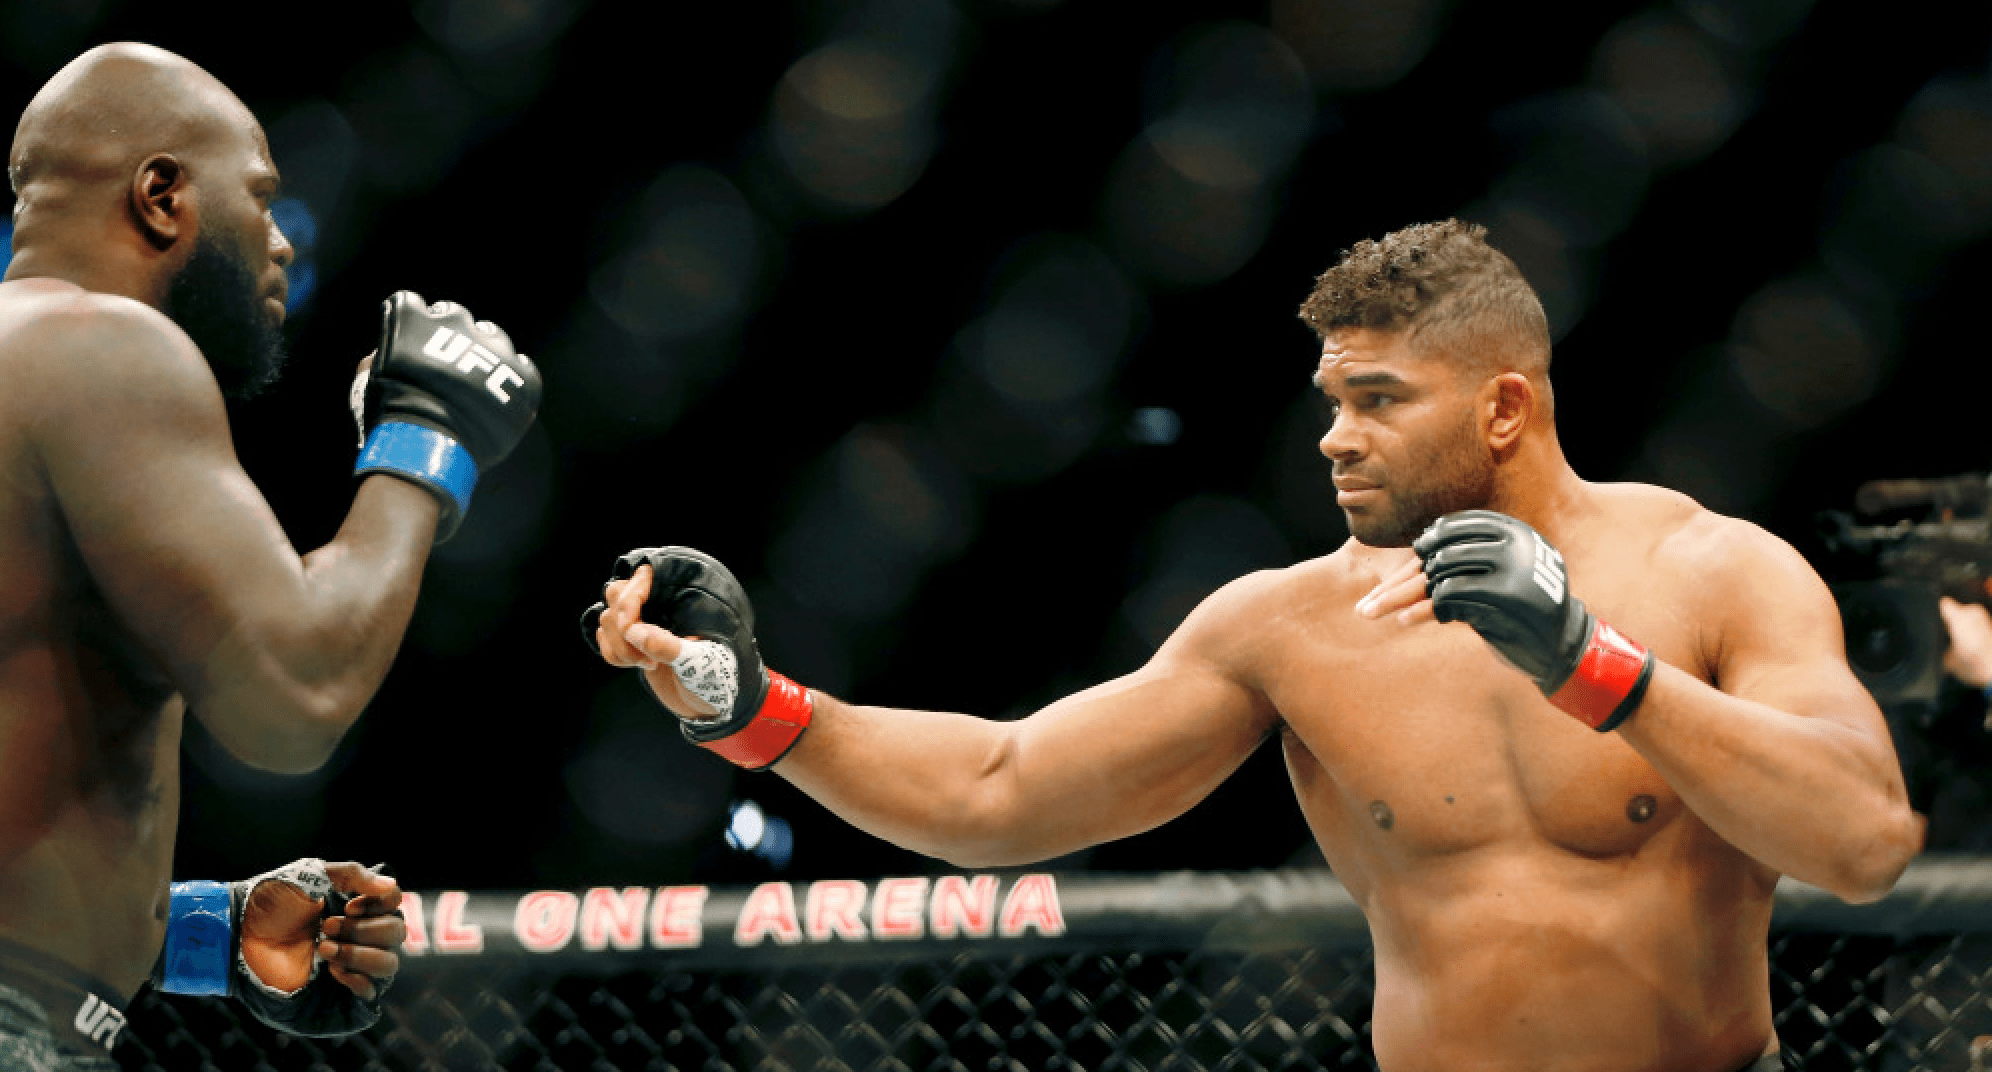 Alistair Overeem Targets UFC Heavyweight Title Before Retirement